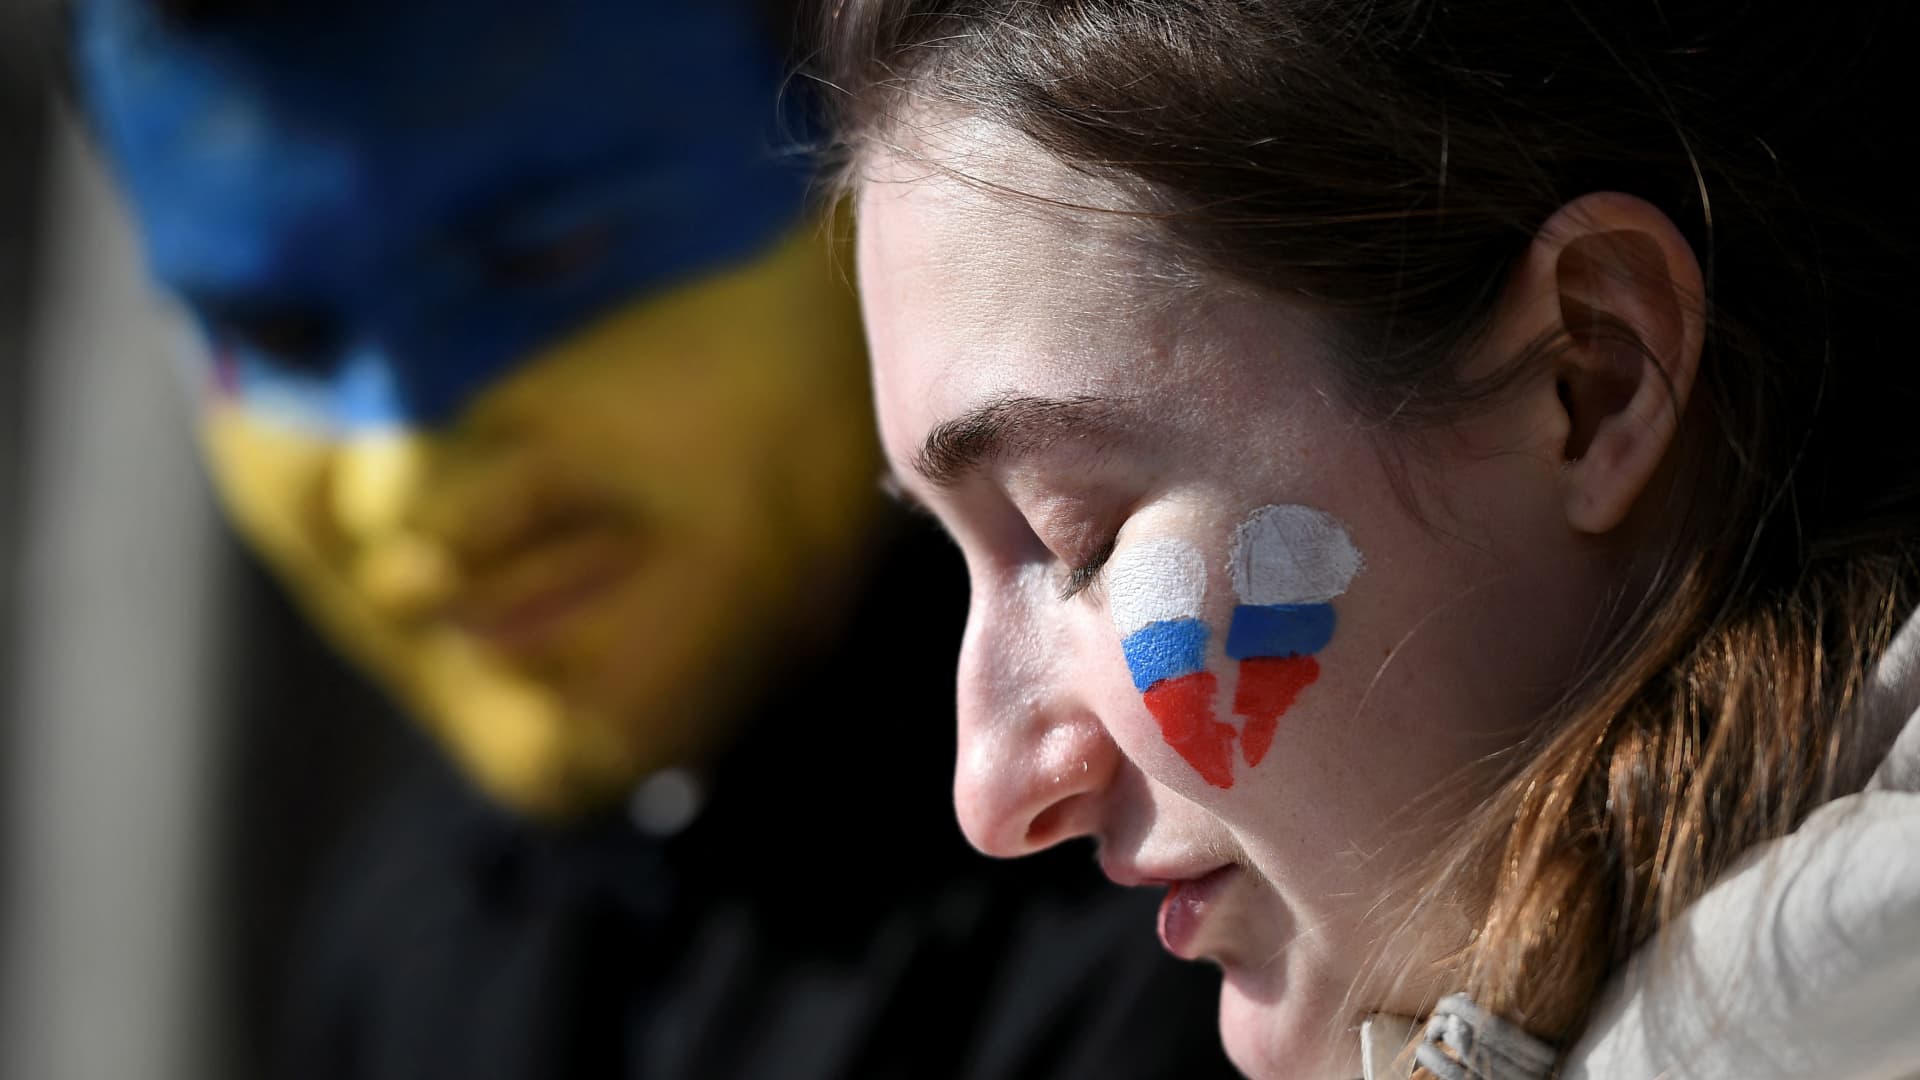 A men with blue and yellow make-up on his face, colours of the Ukrainian flag, and a woman with a broken heart in the colours of the Russian flag make-up on her face attend a demonstration at the Place du Capitole, in Toulouse, southern France, on February 27, 2022, against the Russian invasion in Ukraine.